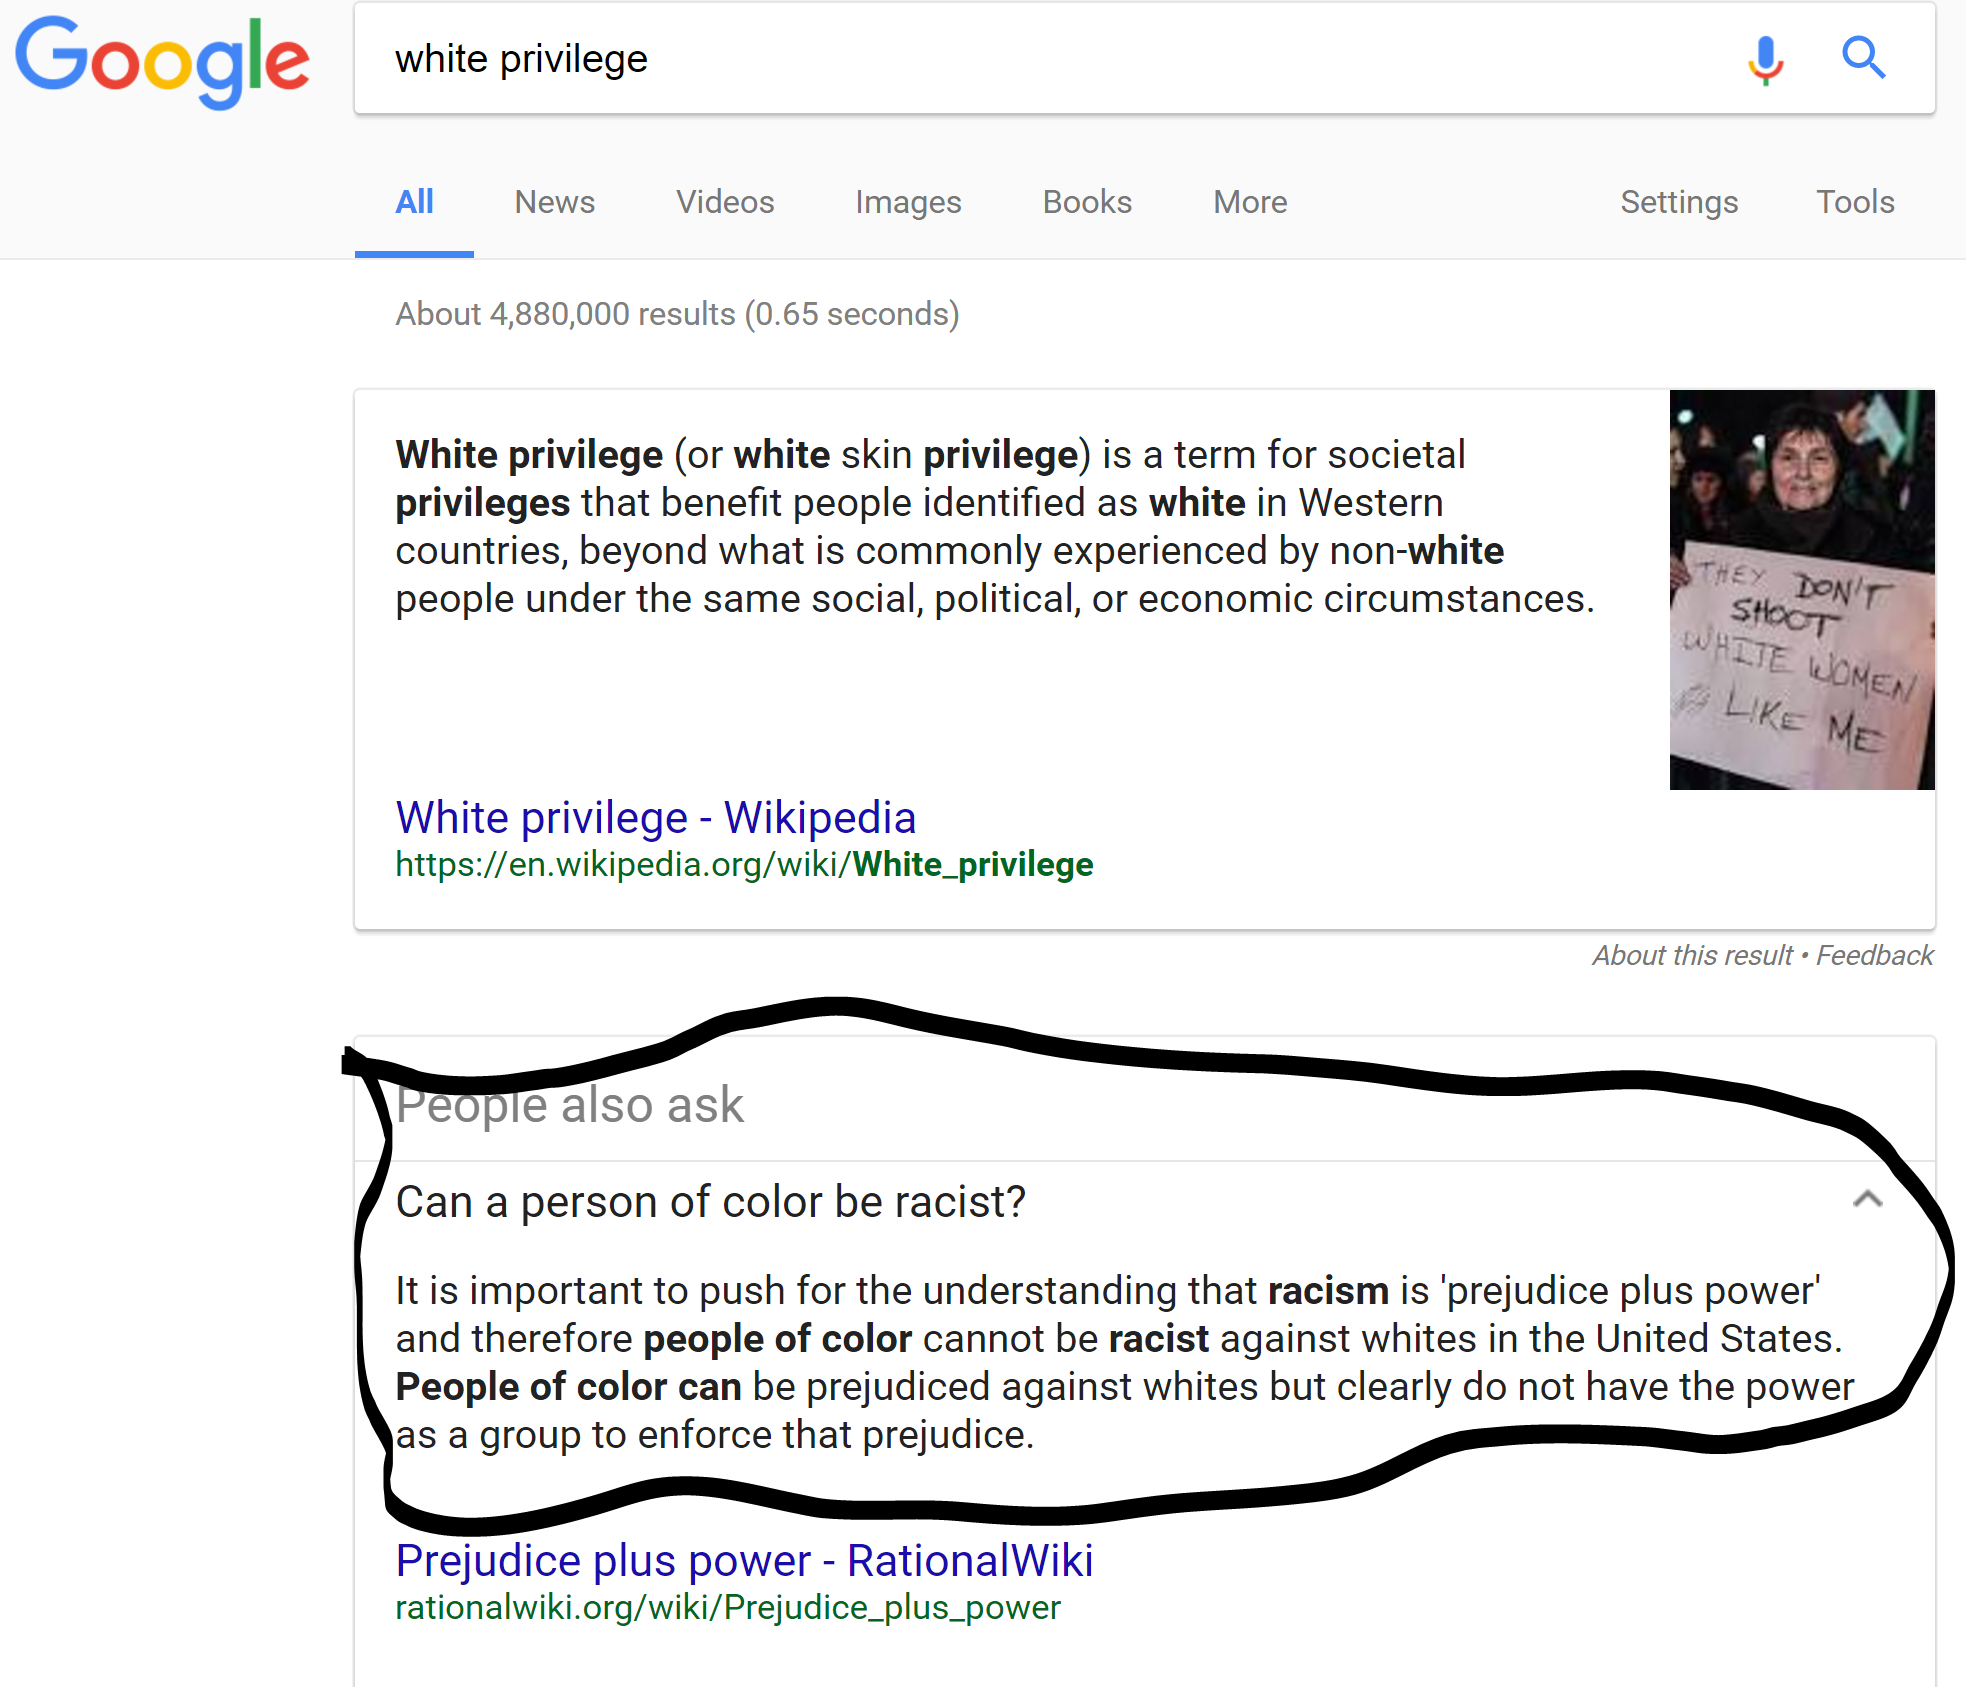 google and rational wiki says that coloured people cannot be racist to white people